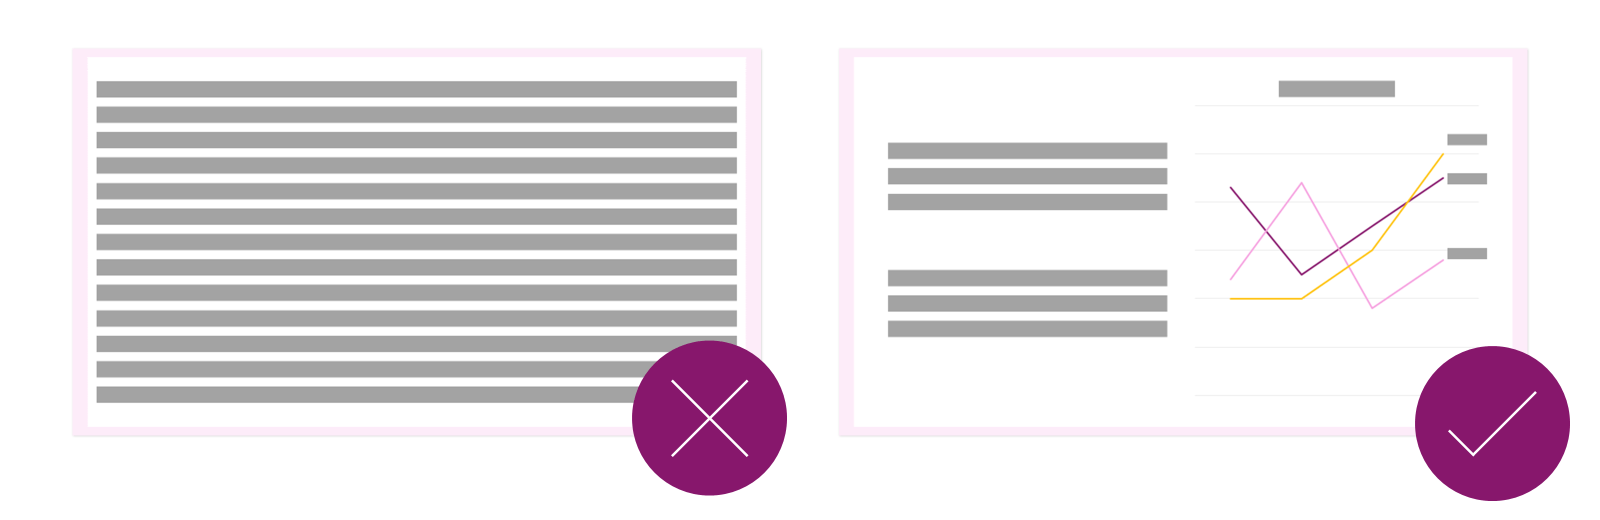 Two slides sit next to each other. On the first, long bars in grey represent text filling the slide, from left to right. On the right the slide has much left text, shorter lines and a graphic of a graph takes up half the slide.